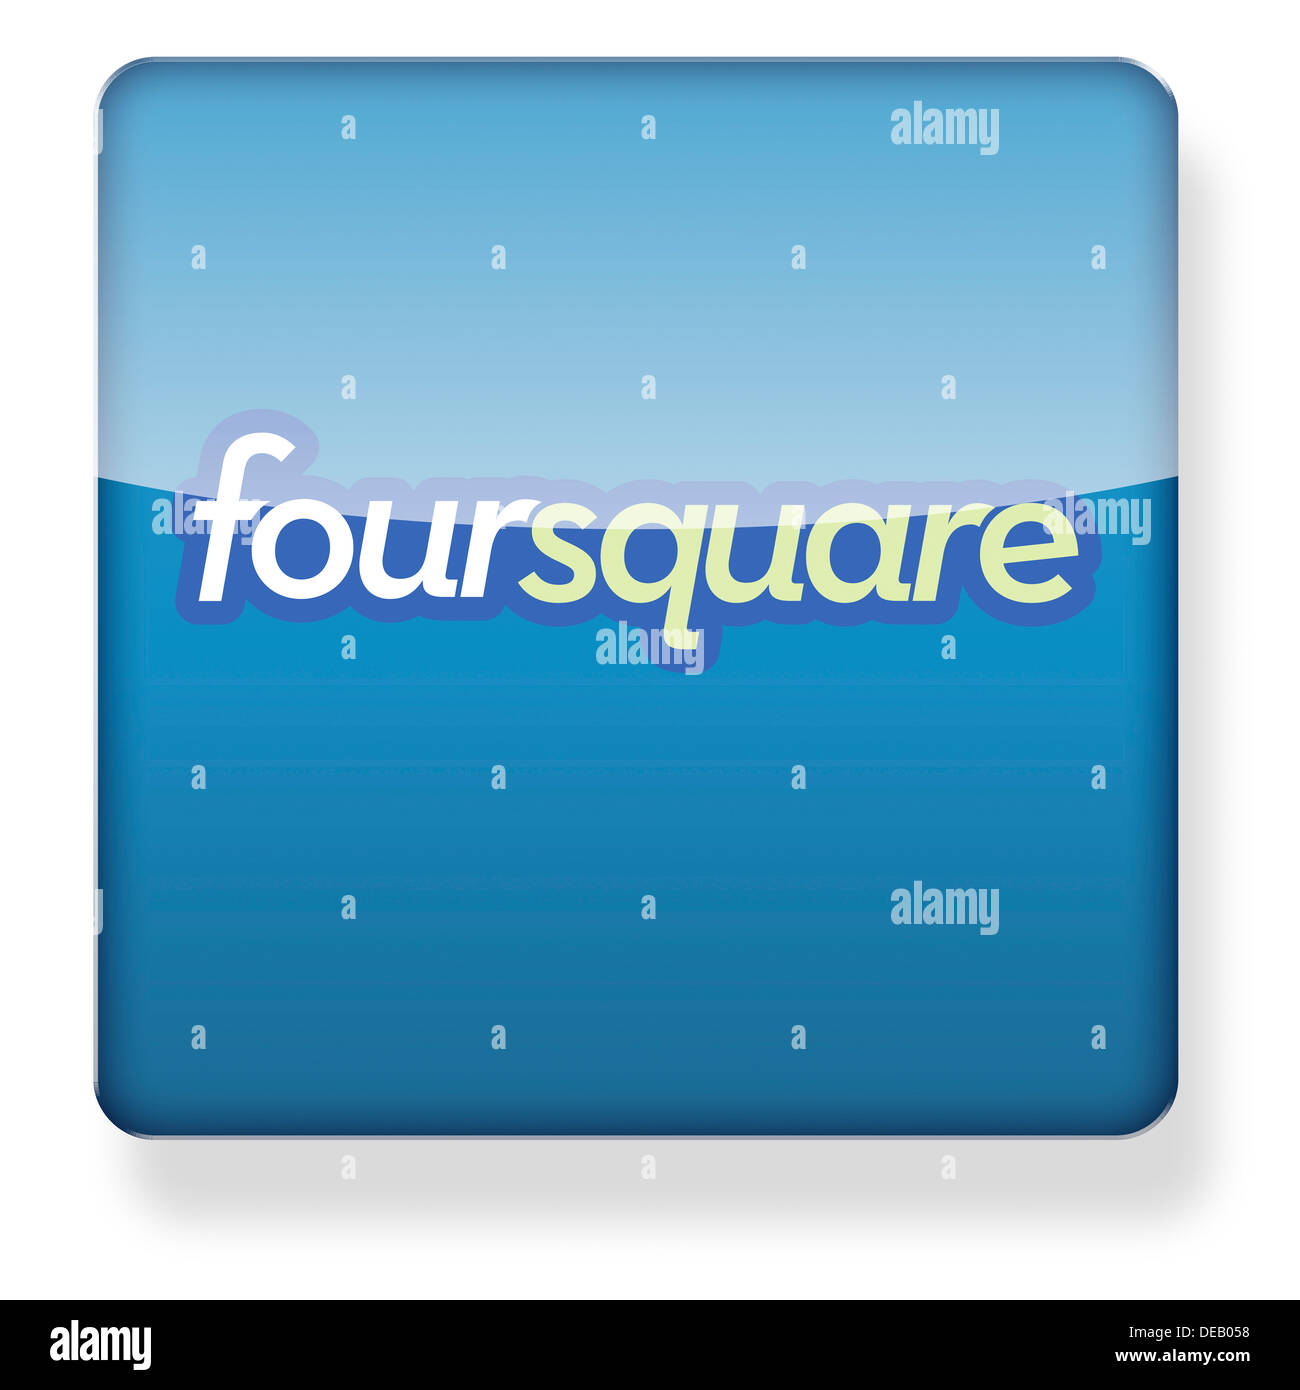 Foursquare logo as an app icon. Clipping path included. Stock Photo